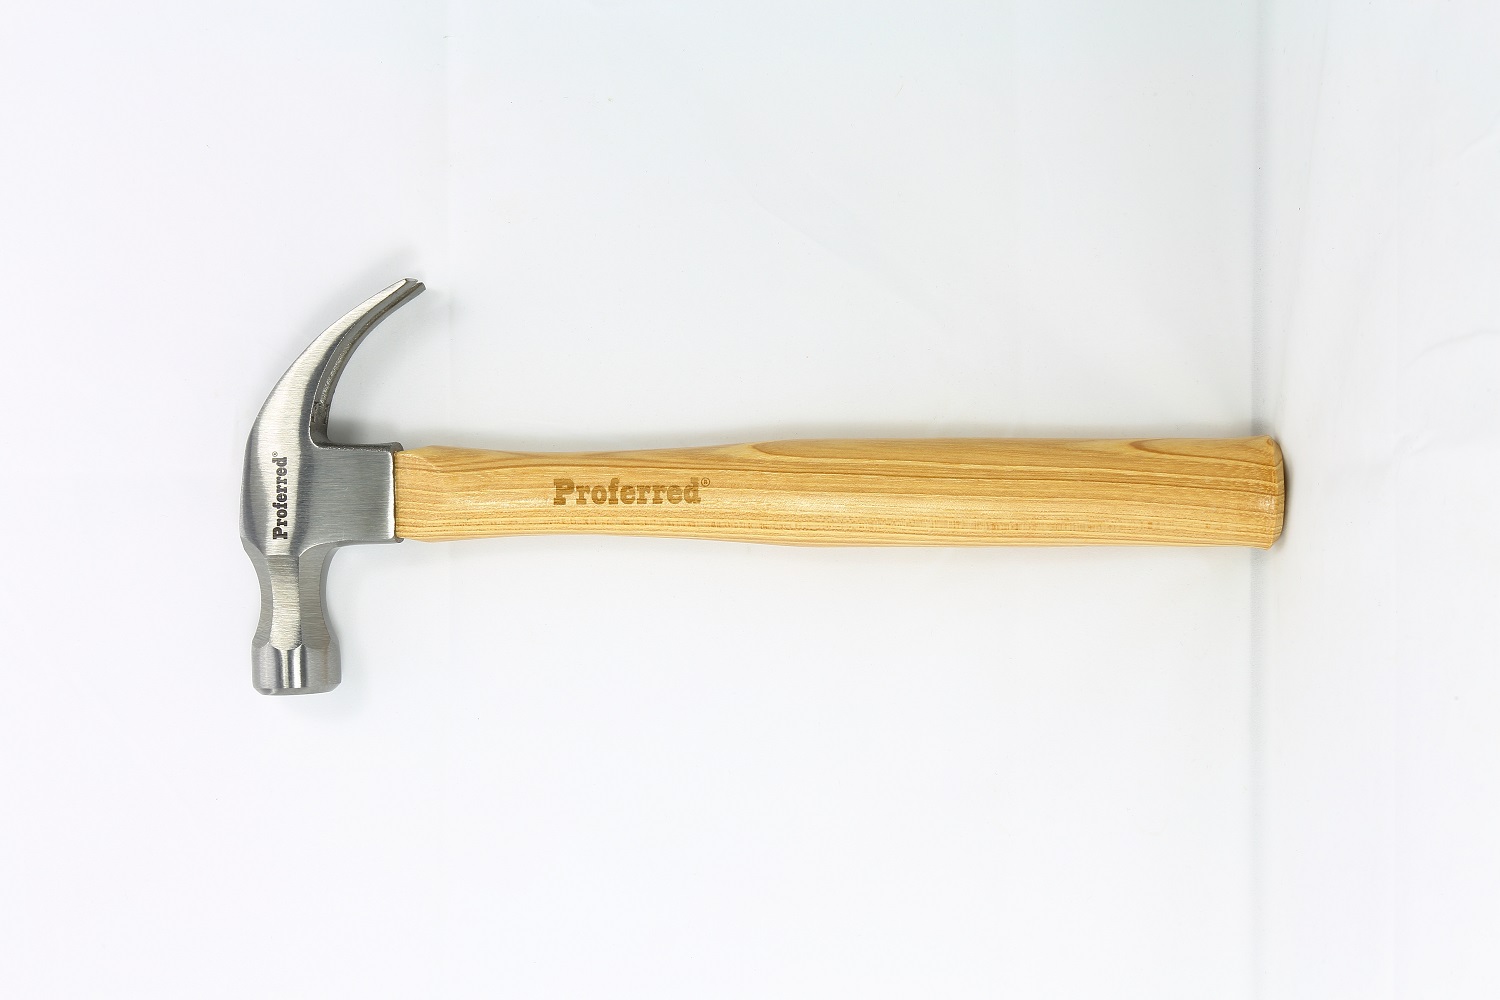 PROFERRED HAMMER 16OZ CURVED CLAW HICKORY HANDLE